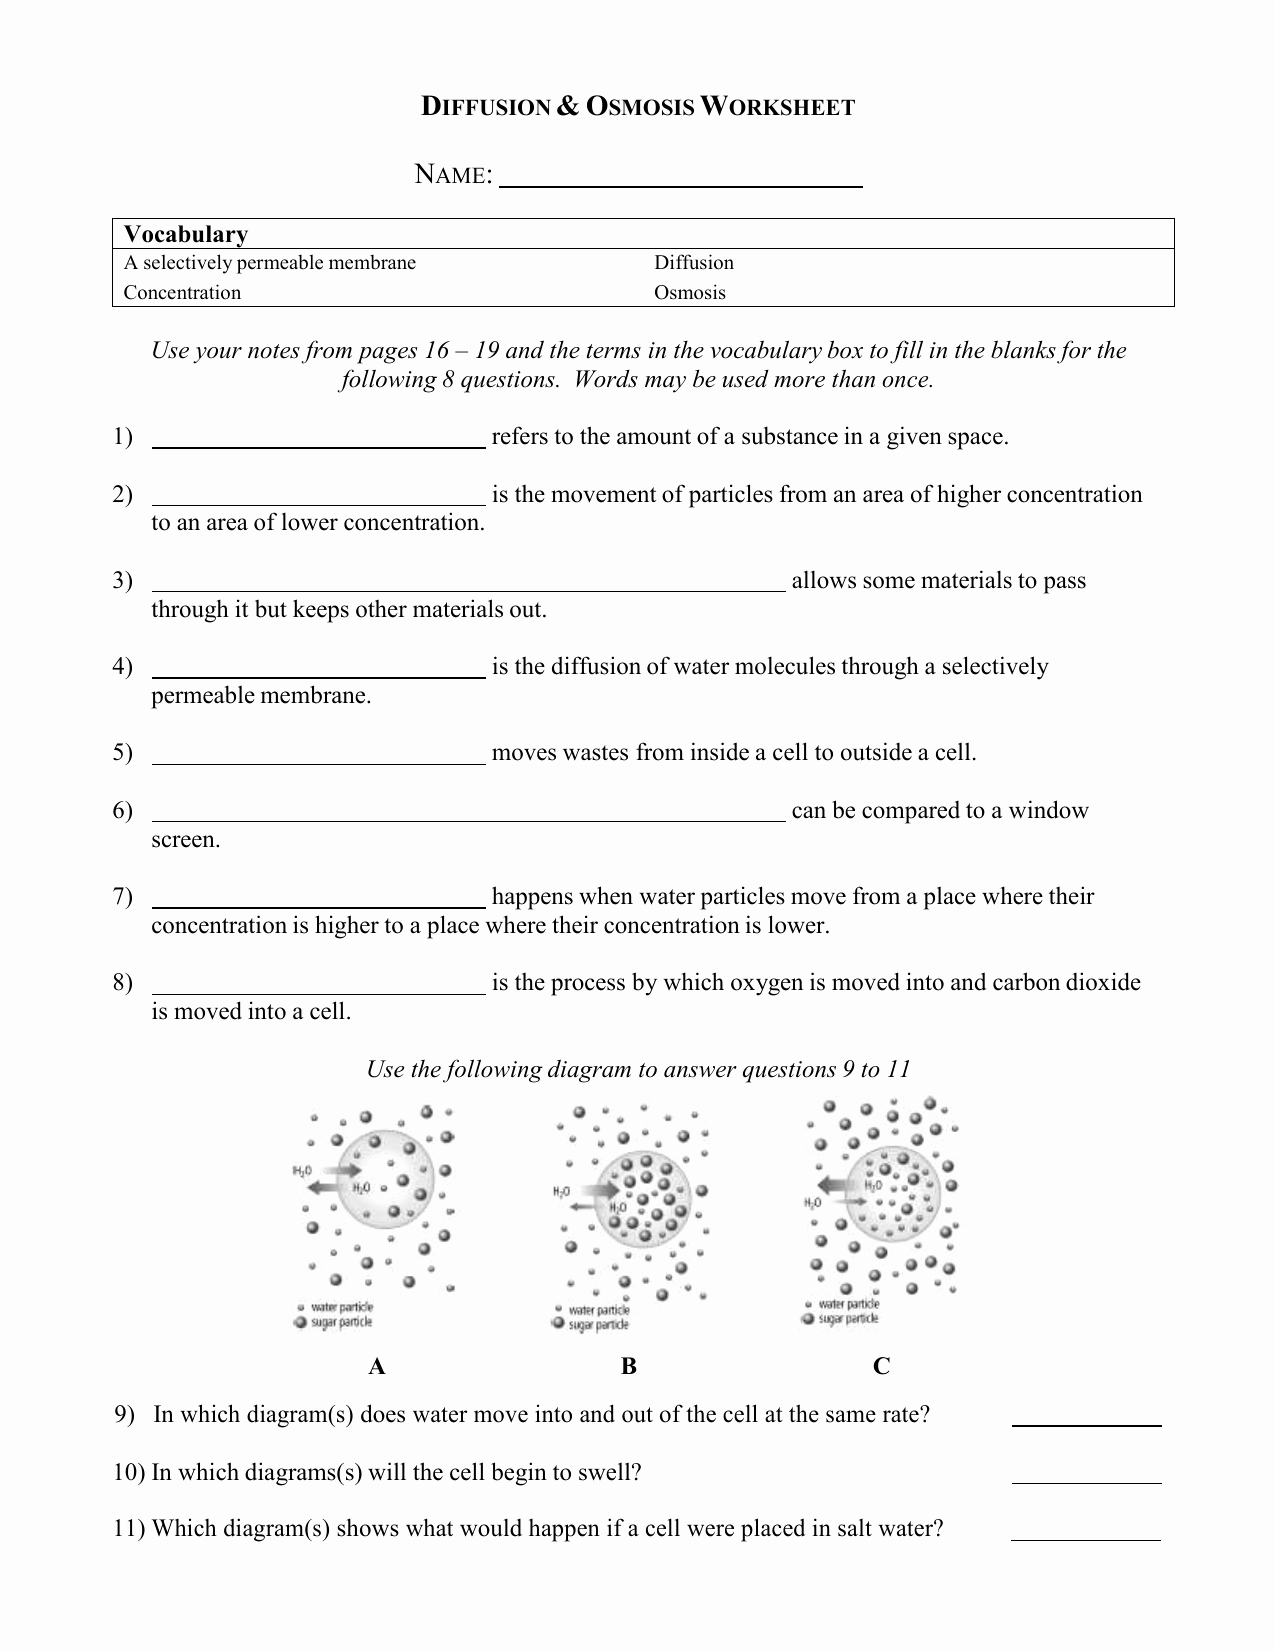 Diffusion and Osmosis Worksheet Answers Best Of Diffusion Osmosis Worksheet 4